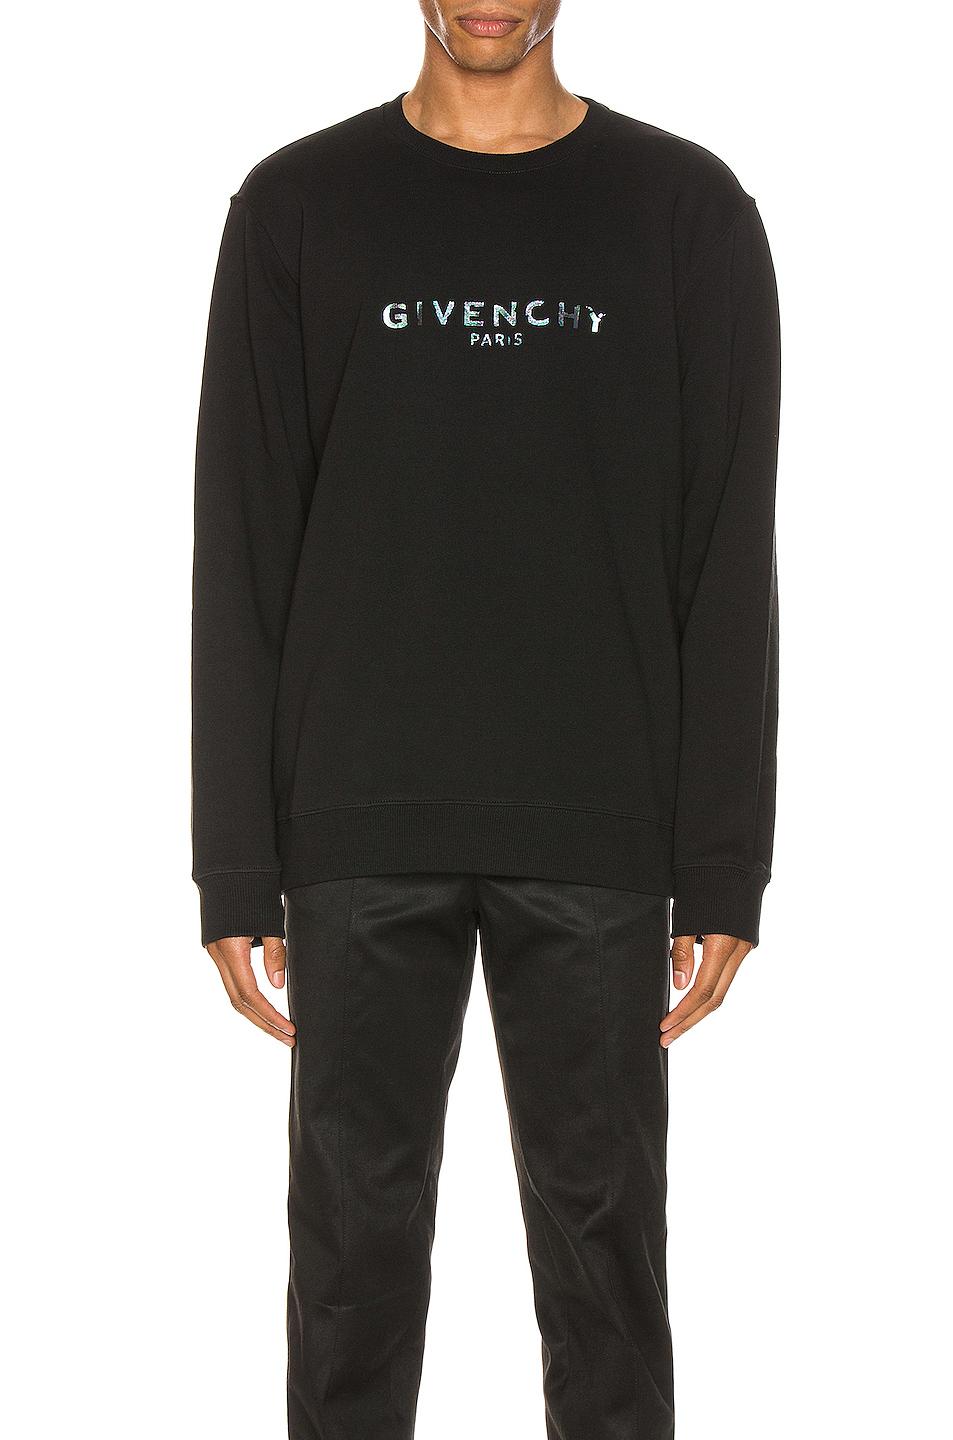 Givenchy Cotton Sweatshirt in Black for Men - Save 30% - Lyst